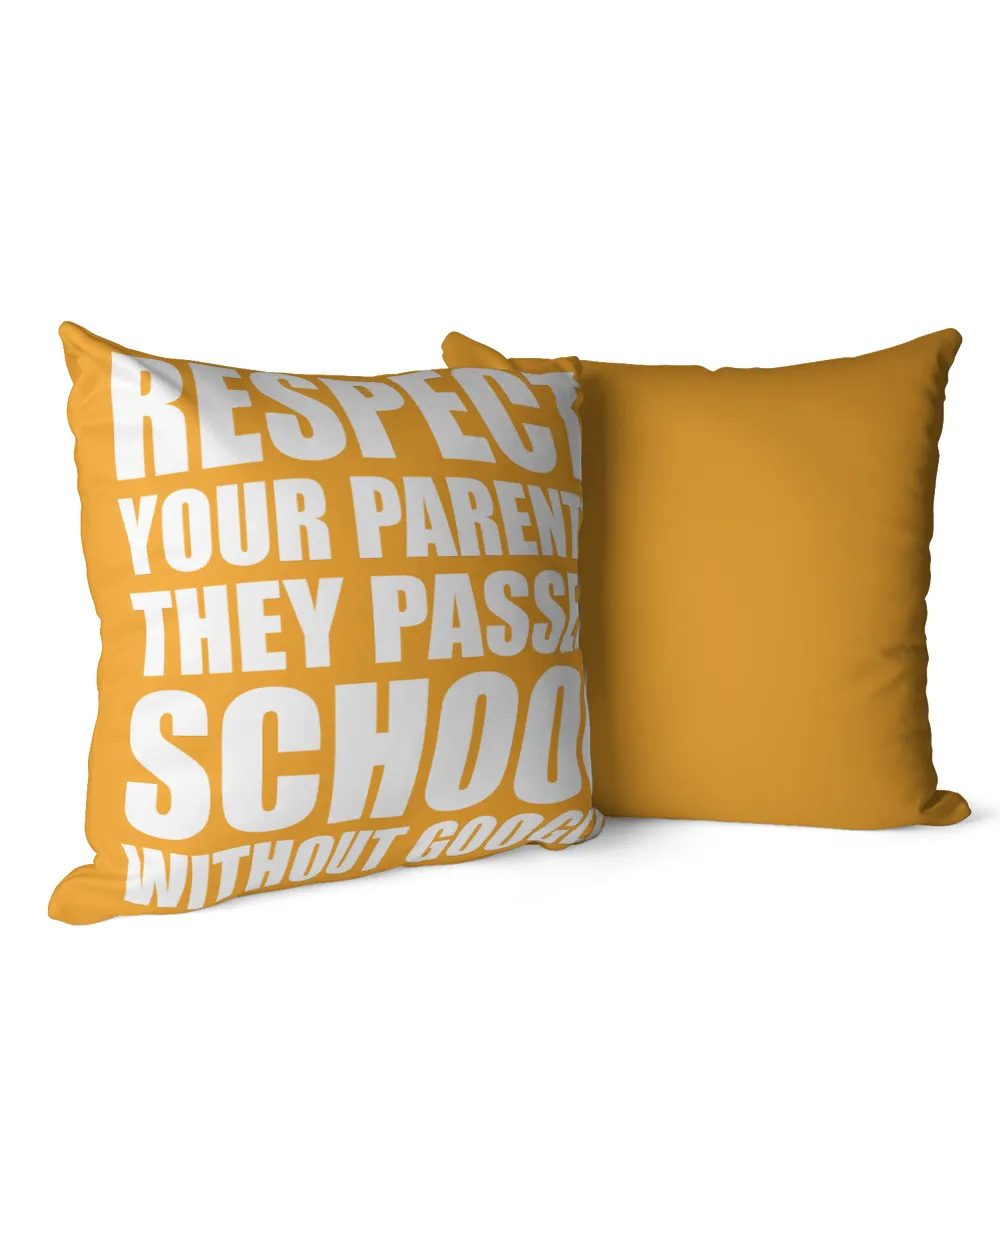 Respect Your Parents They Passed School Without T-Shirts, Hoodies, Sweatshirt, Mugs